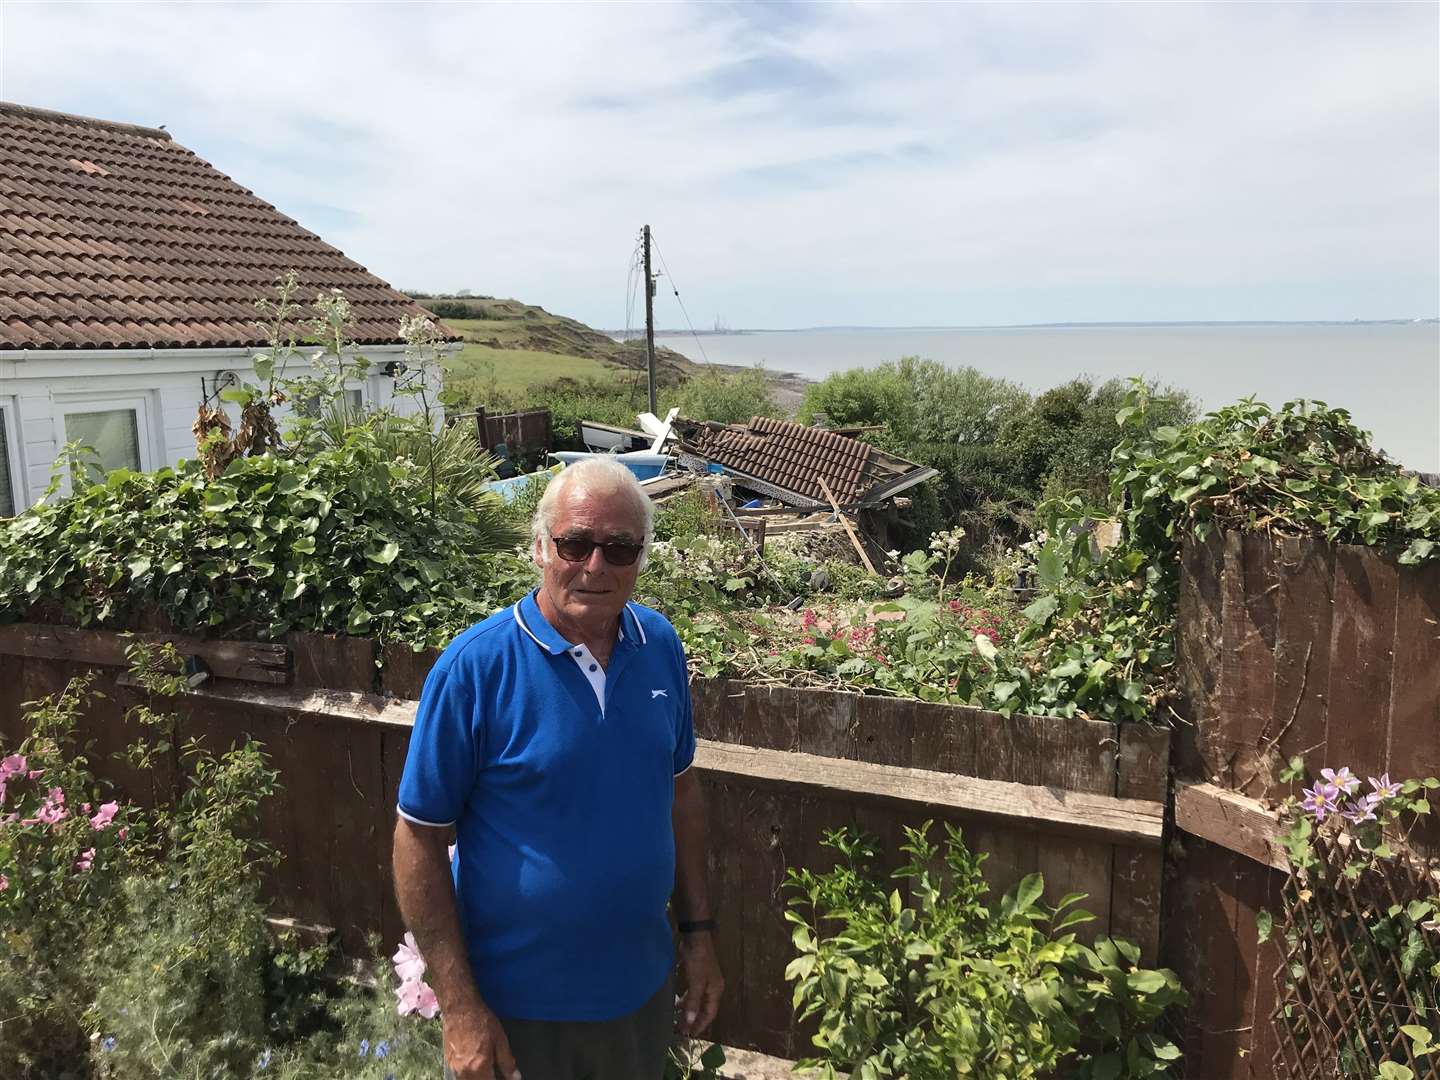 Ed Cane's home backs onto Cliffhanger, which fell off the cliff at Eastchurch in the early hours